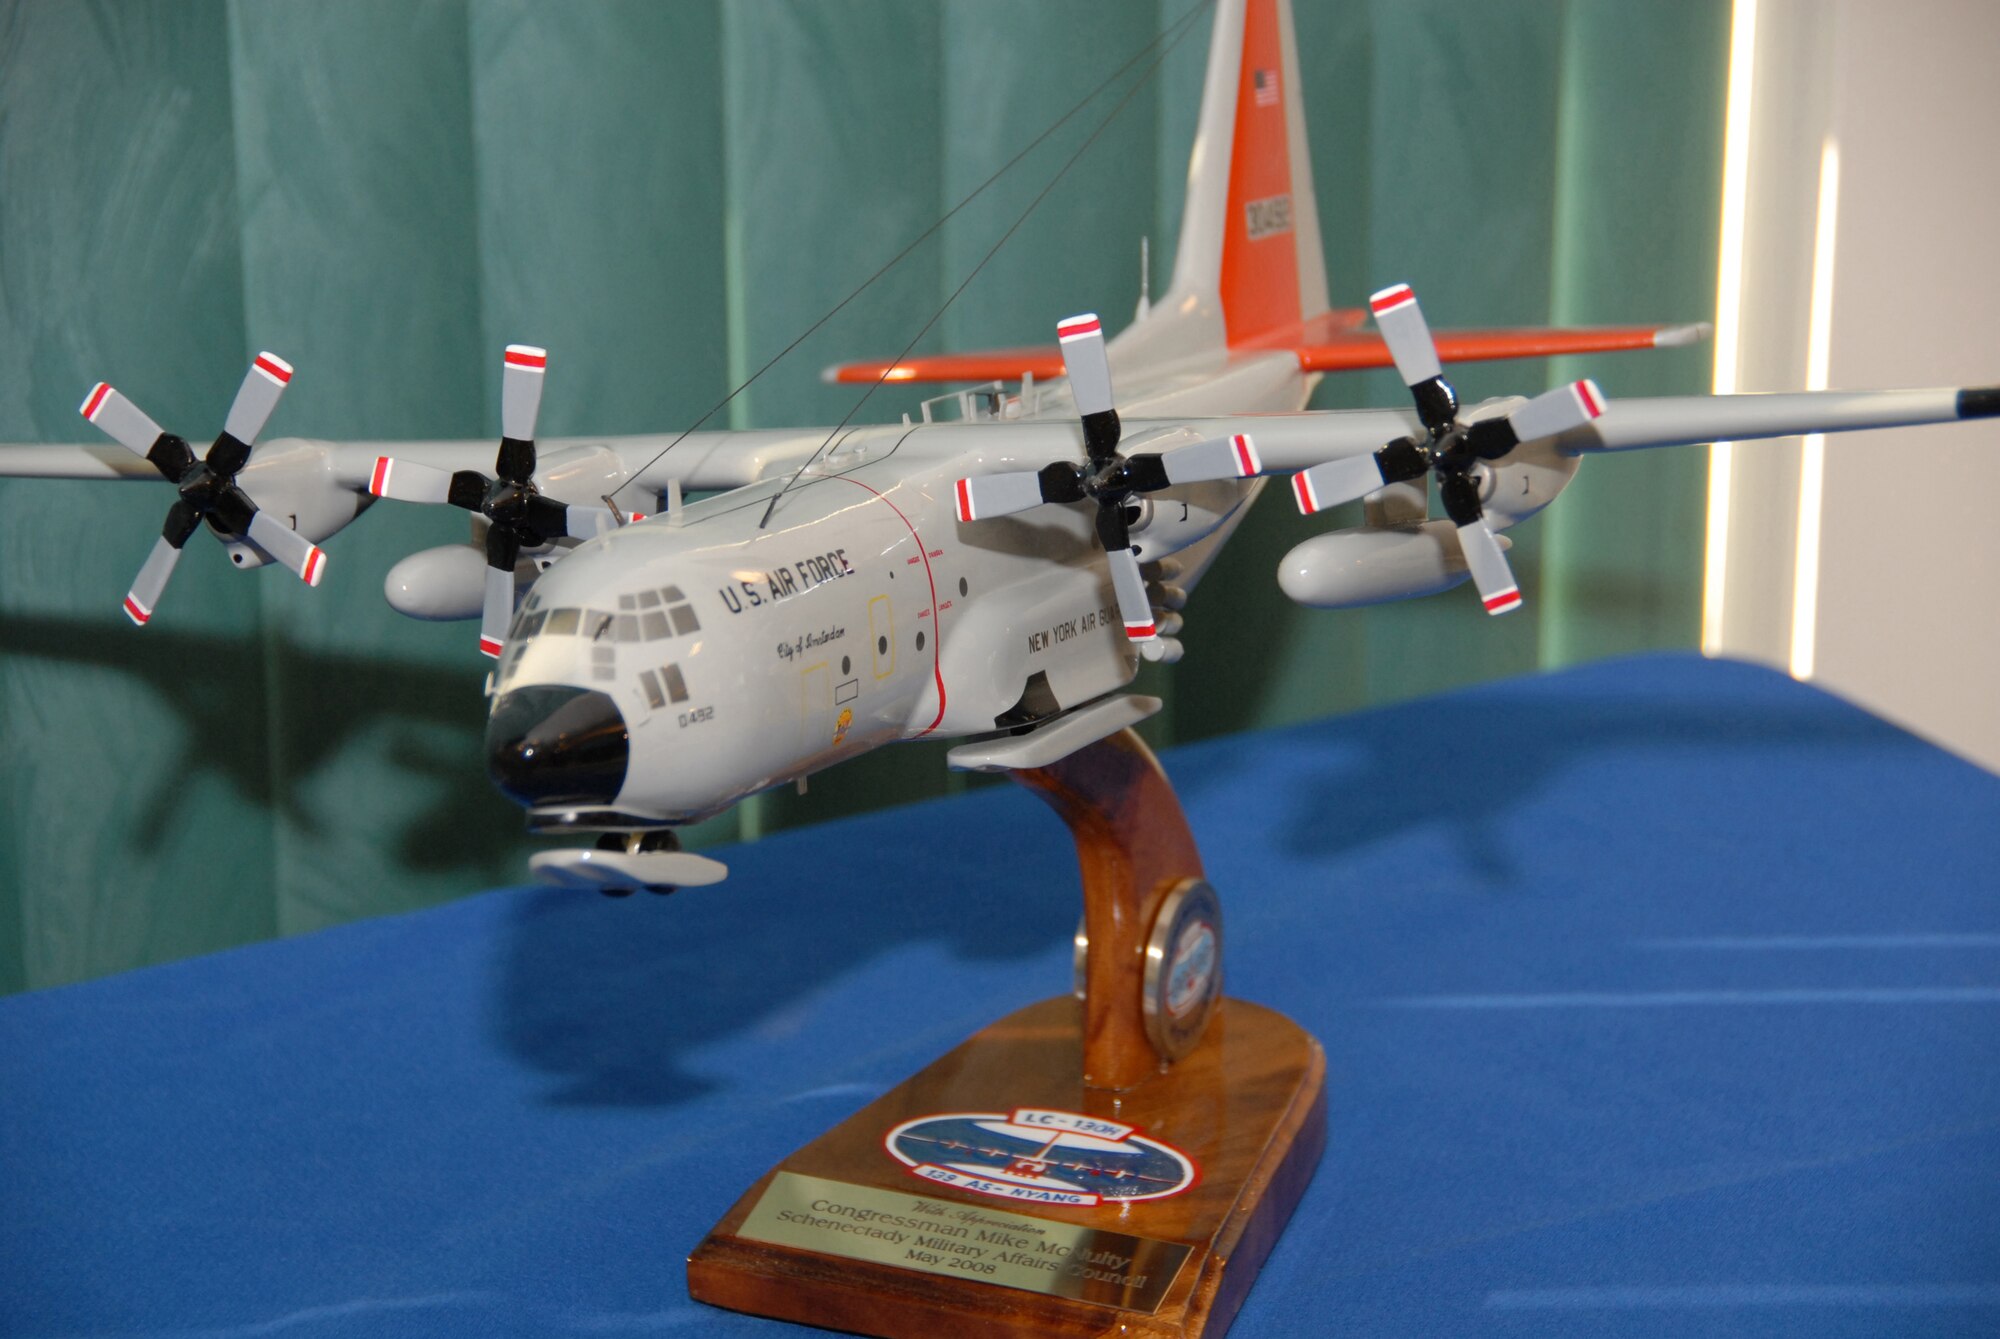 The Schenectady Military Affairs Council presented Rep. Michael McNulty with this model LC-130 aircraft. McNulty, who represents the 21st Congressional District, was honored during a breakfast here May 29. (U.S. Air Force photo by Master Sgt. Willie Gizara)